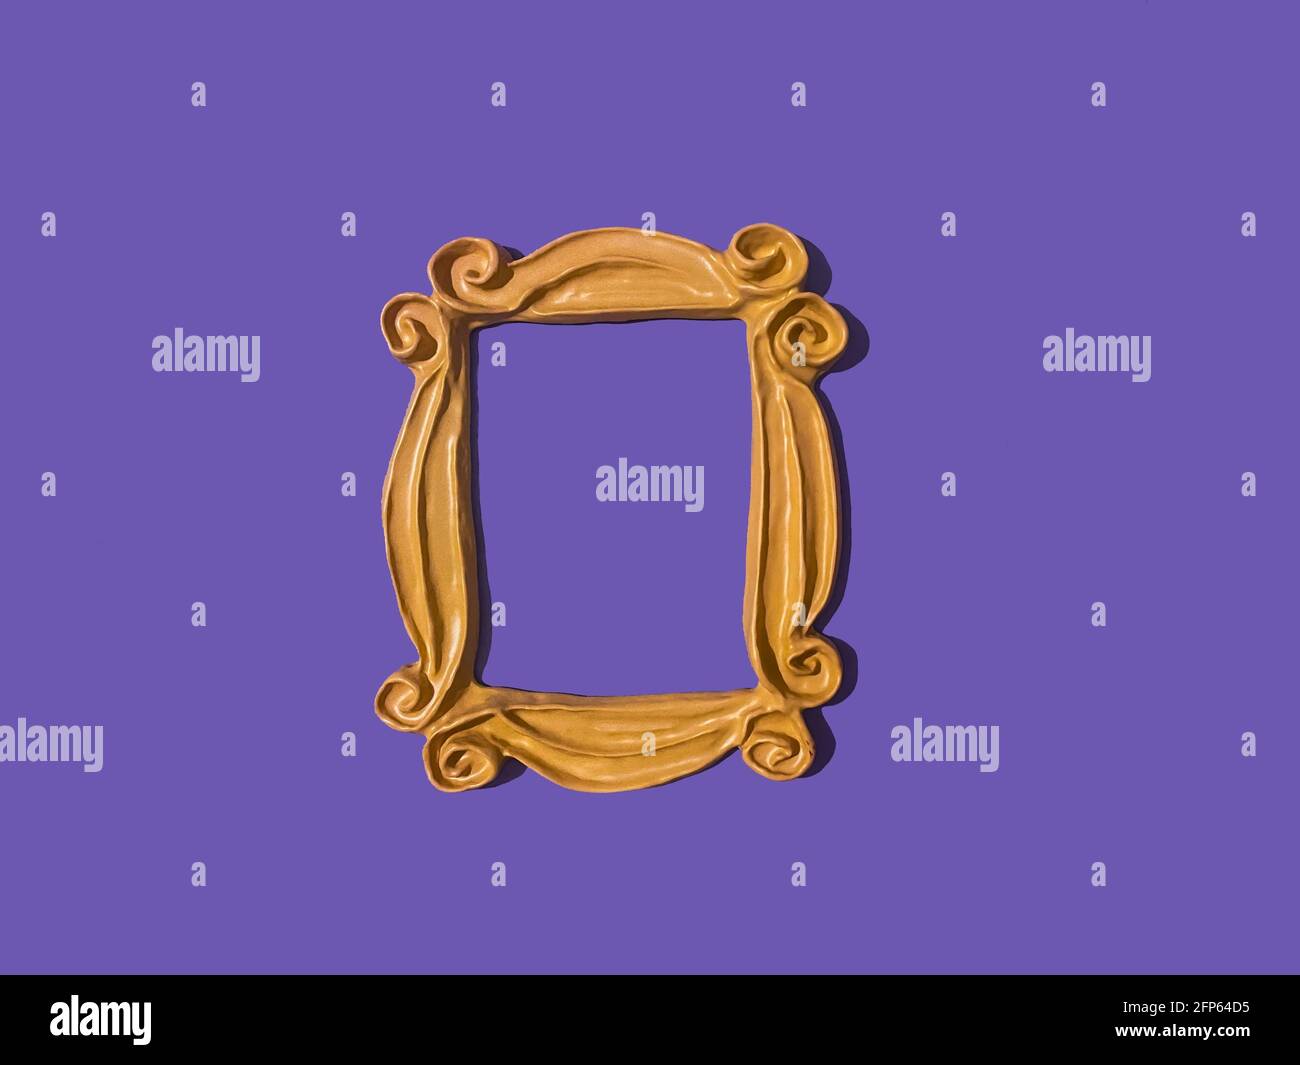 Yellow frame from the FRIENDS tv show which was used around Monica's peephole on the door. Purple wall. Picture frame. FRIENDS television show frame Stock Photo